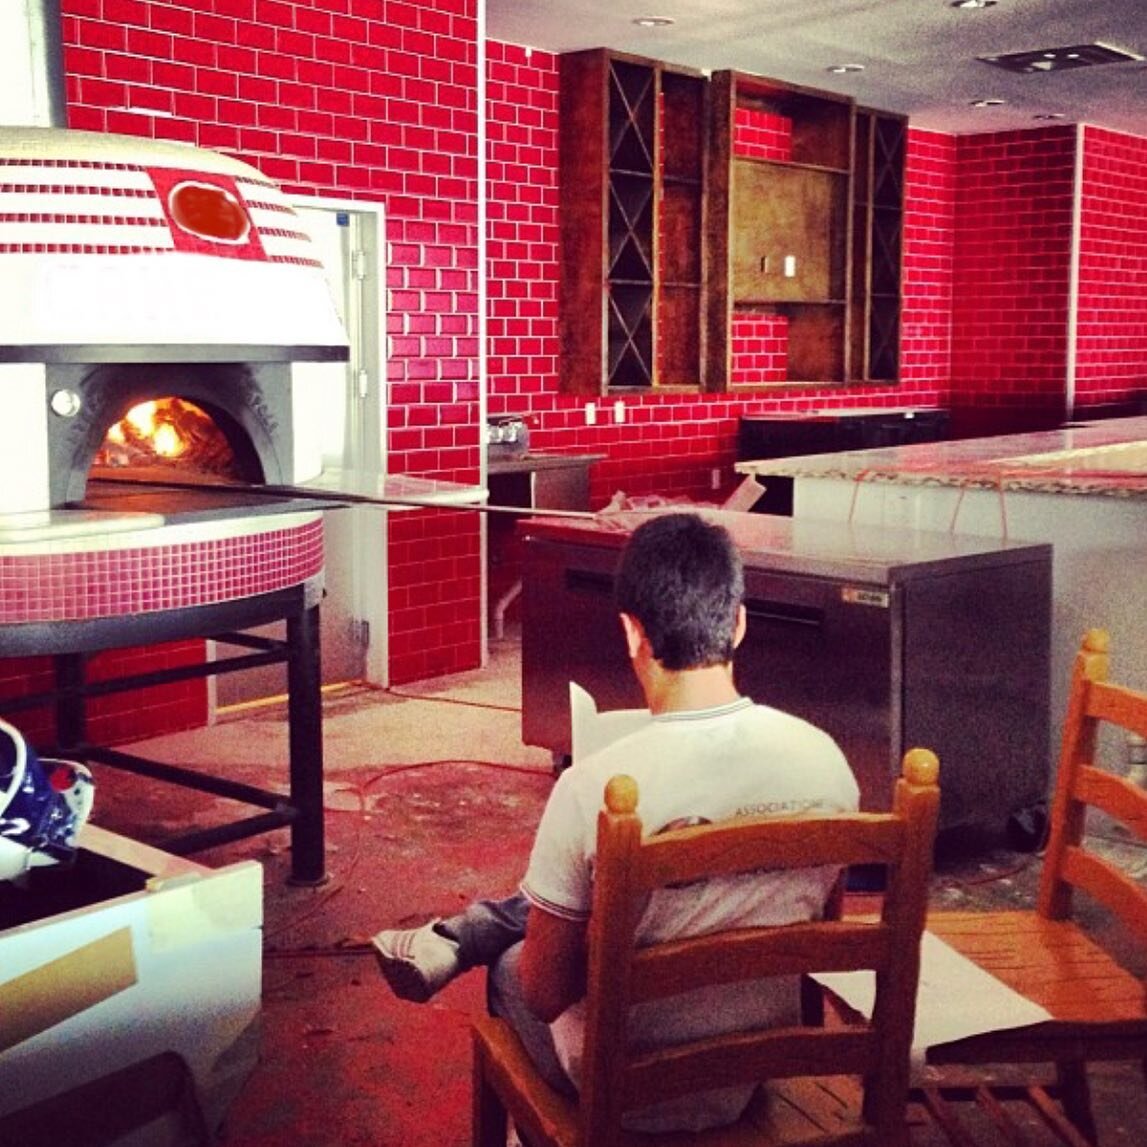 Opening a New Pizzeria is also waiting 7 days in order to cure the oven. Low Temp on Day one and keep increasing till you reach 900F on day 7.
You won&rsquo;t shock your oven and cause any damage 
Start a small Fire on day one and feed it for 7 days 